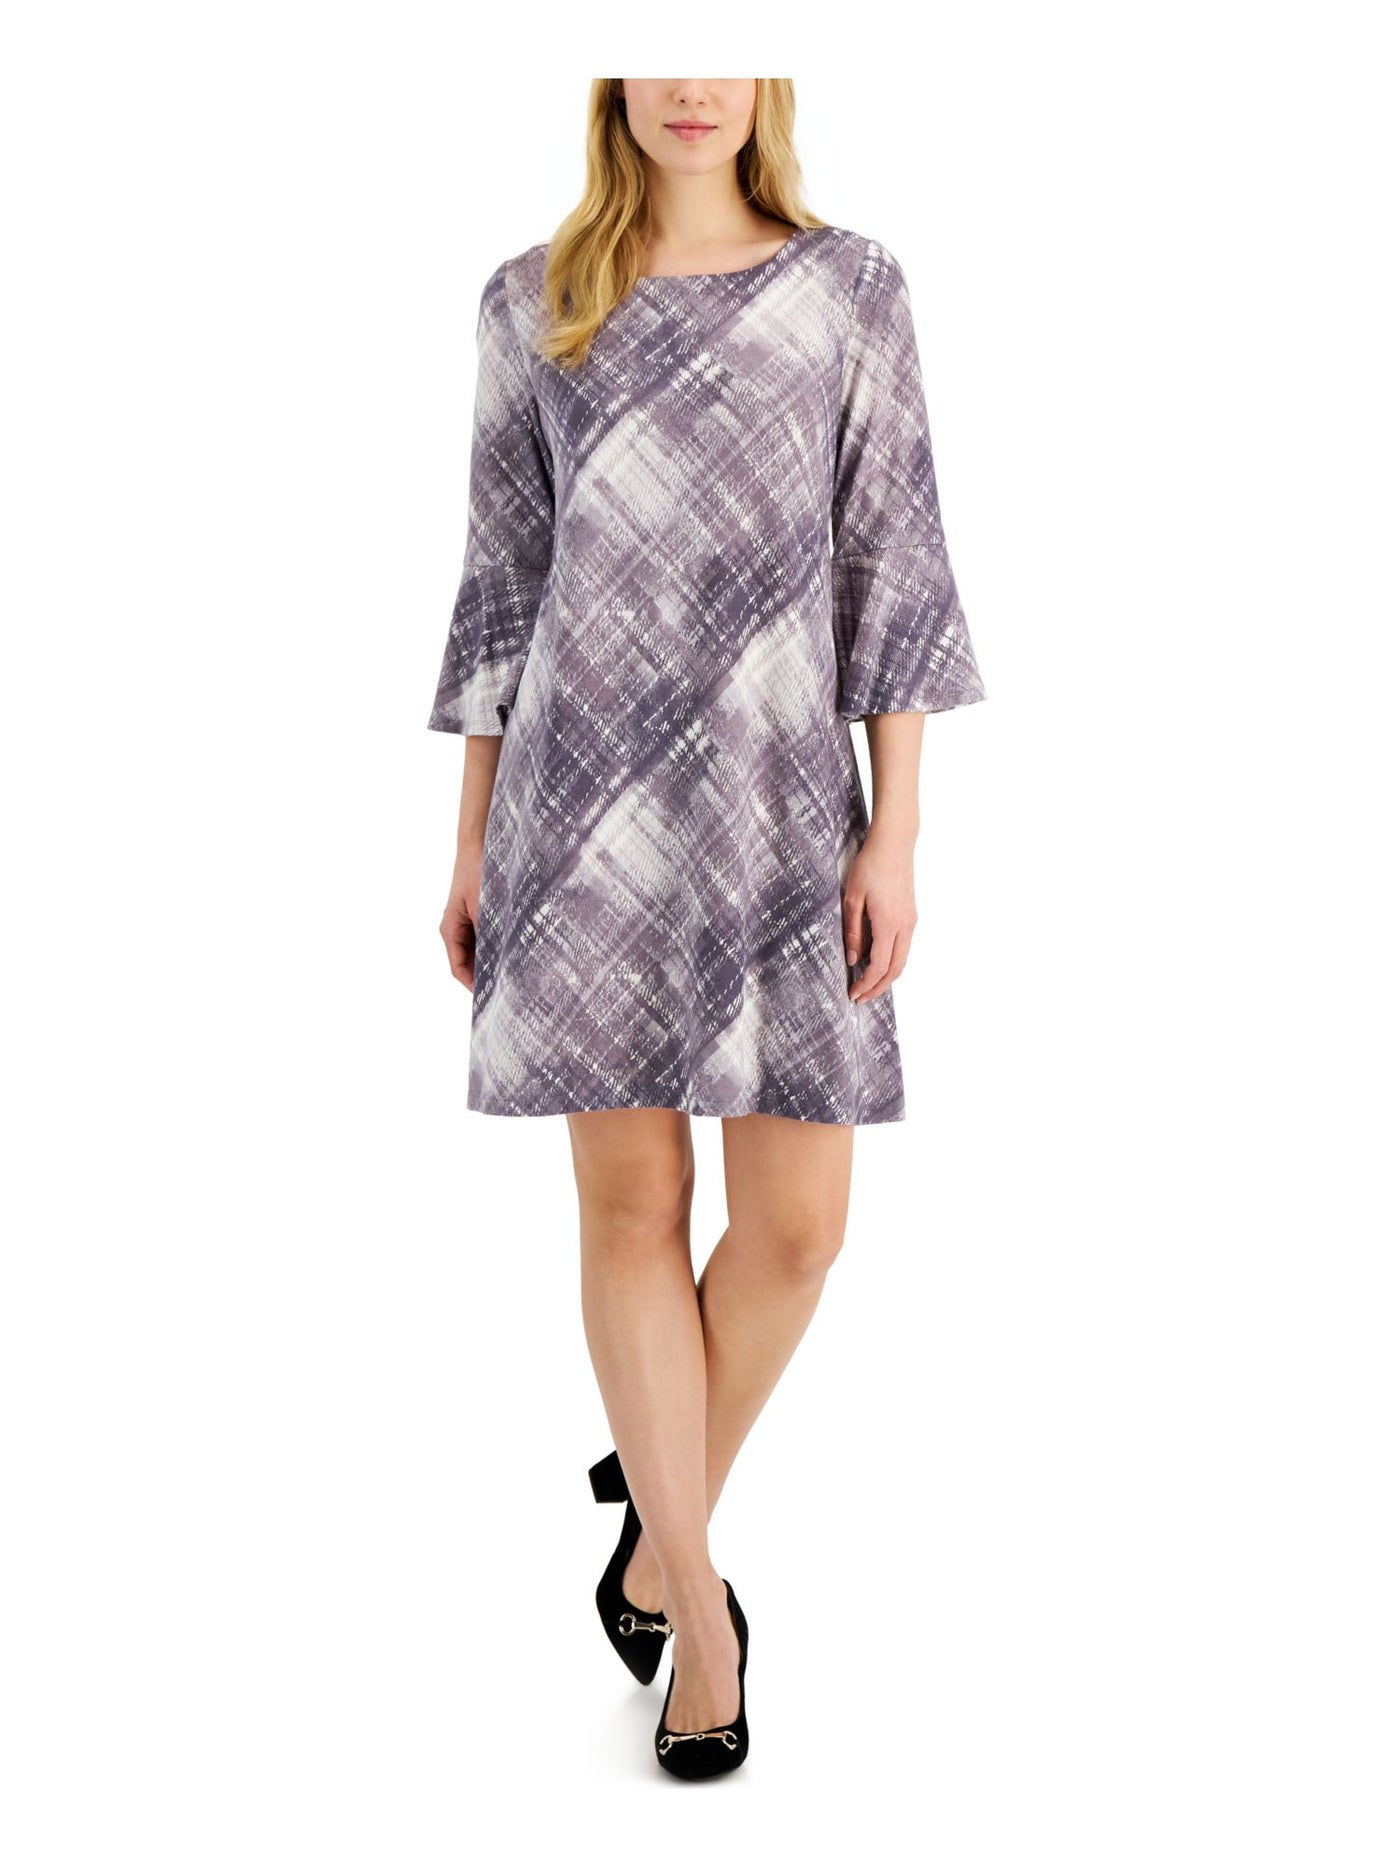 CONNECTED APPAREL Womens Purple Stretch Plaid Bell Sleeve Round Neck Short Wear To Work Fit + Flare Dress Petites 8P